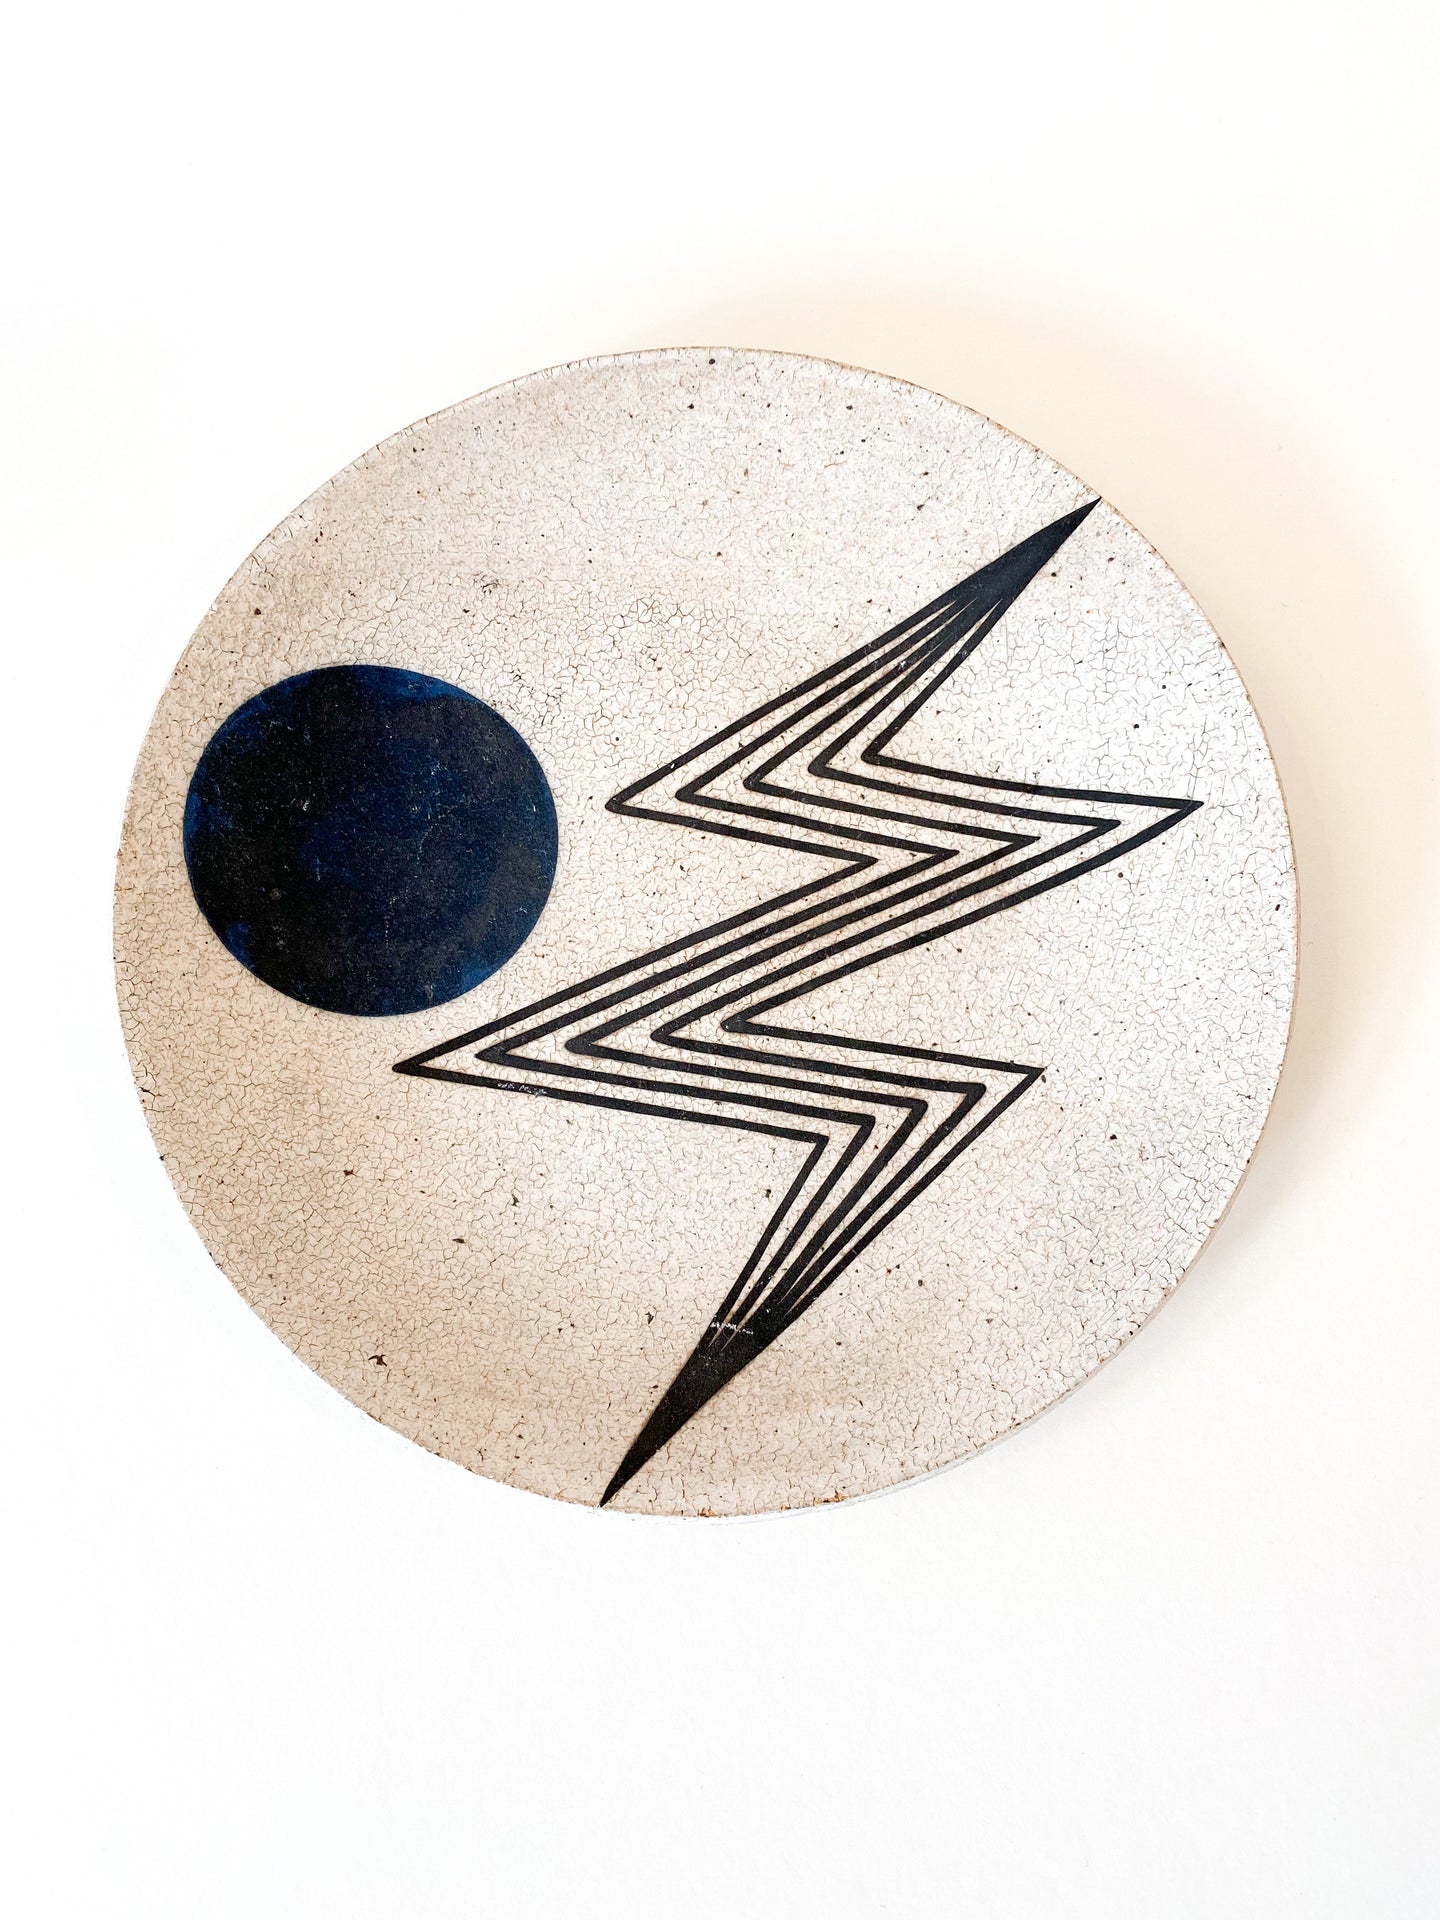 BOLT AND MOON PLATE